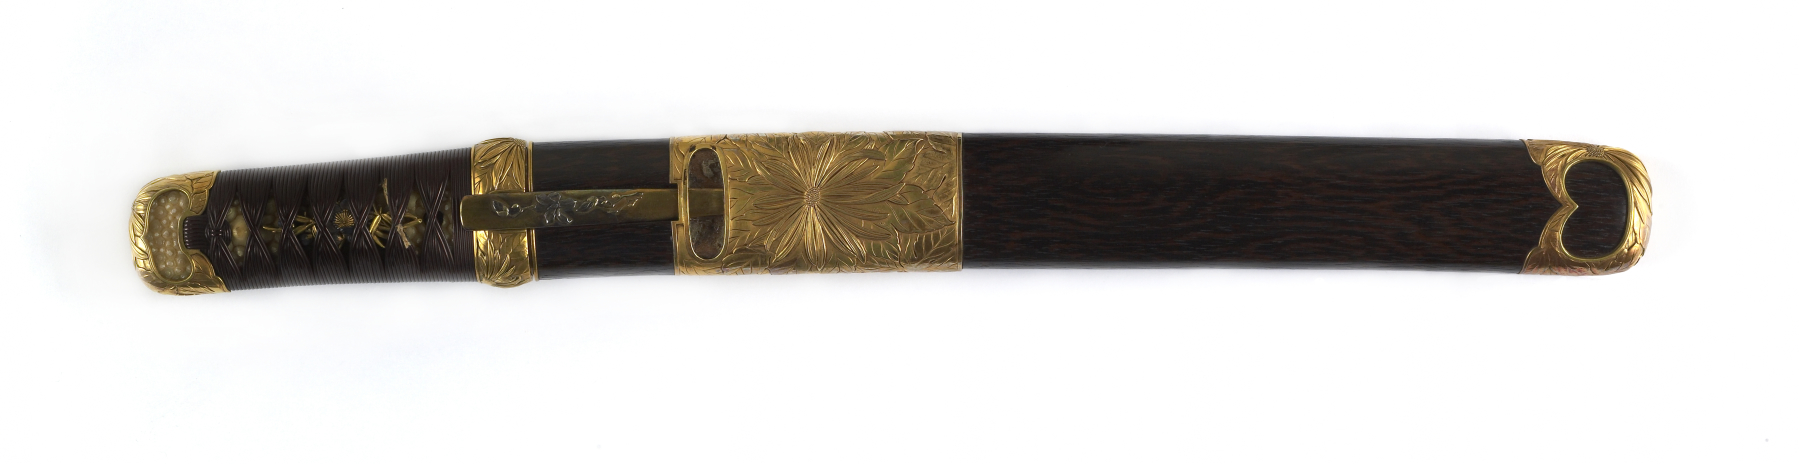 Image for Dagger (aikuchi) with wood saya and gold chrysanthemum mountings (includes 51.1393.1-51.1293.4)